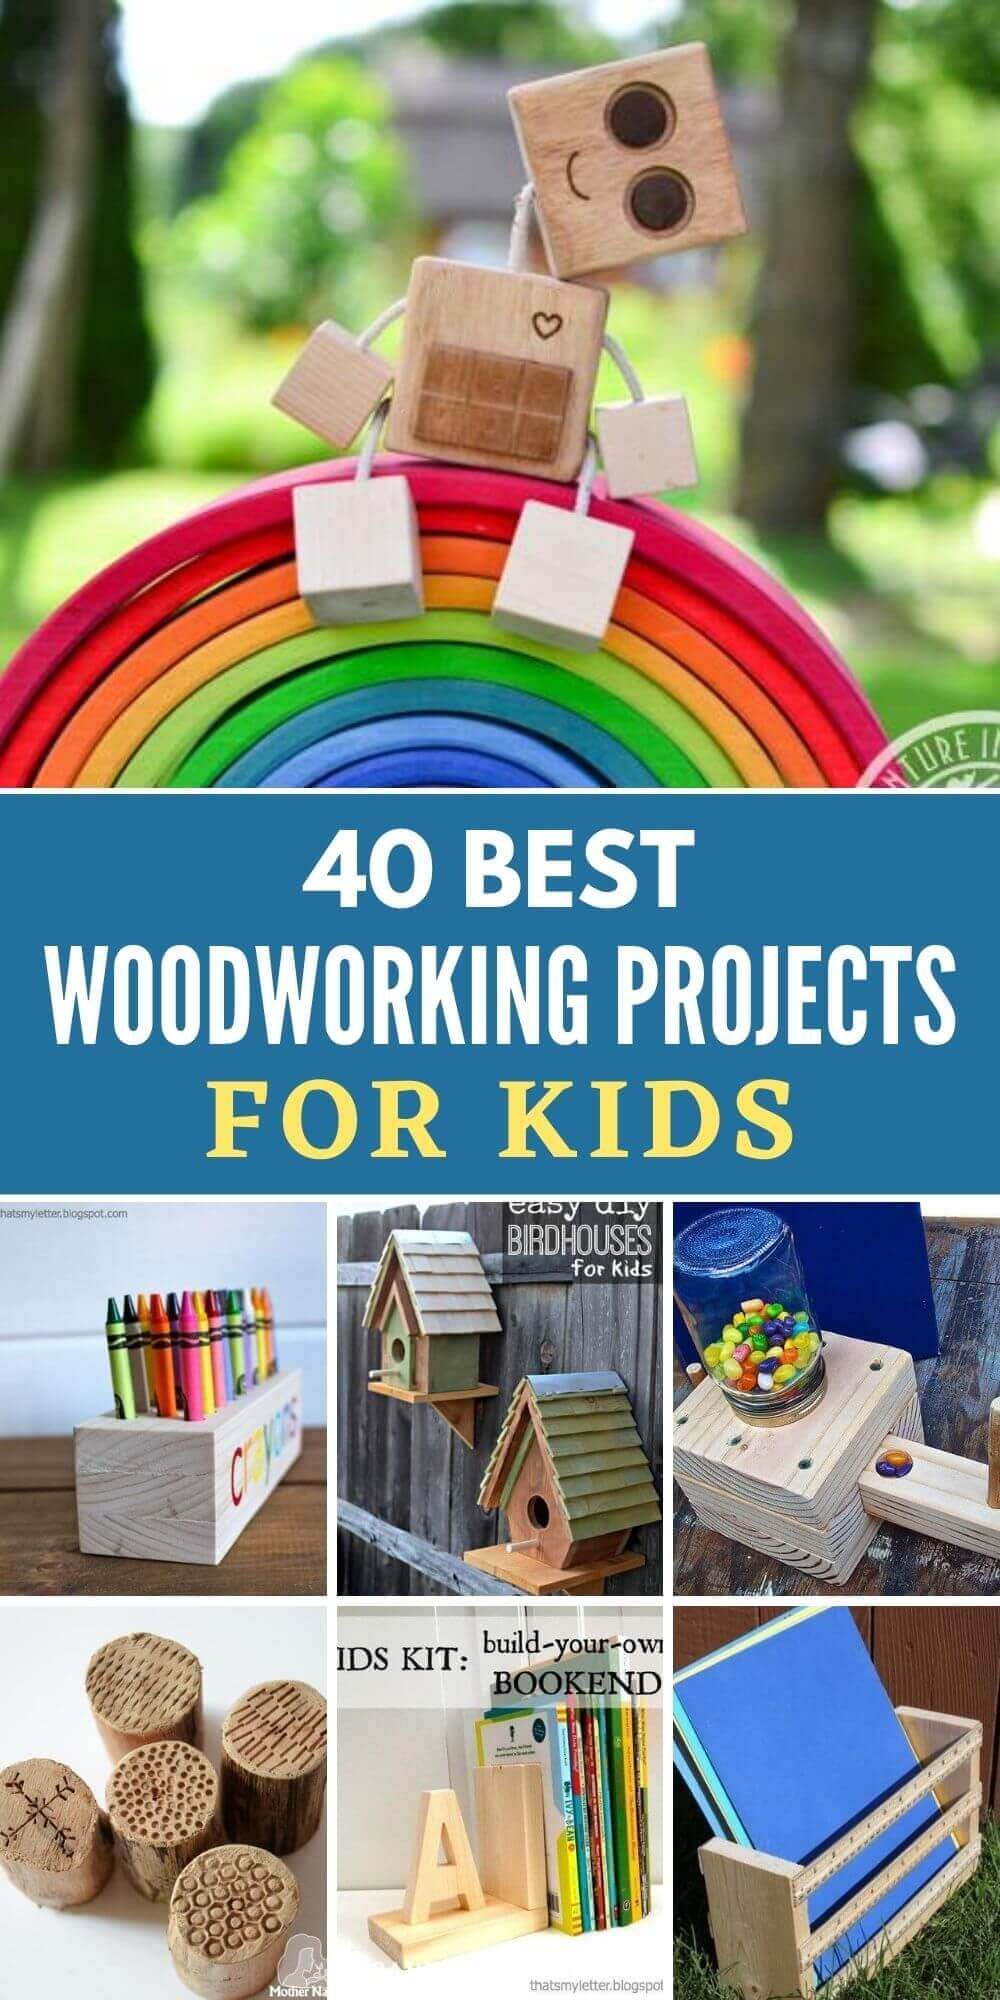 Good woodworking projects for kids